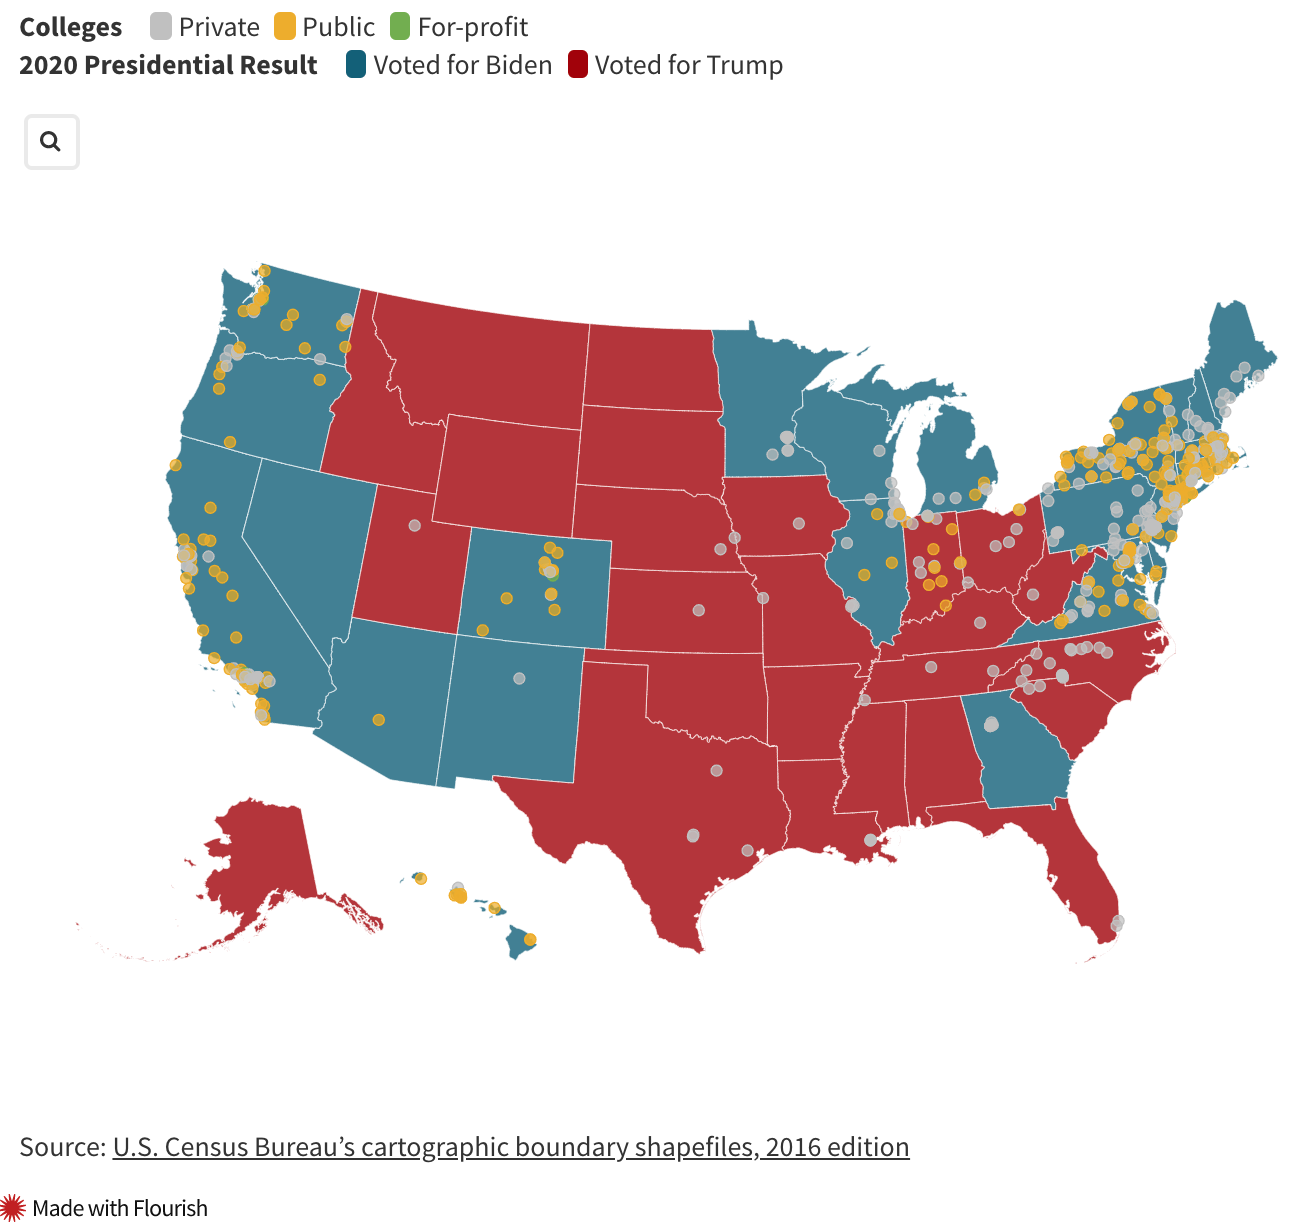 US states that voted for Biden or Trump